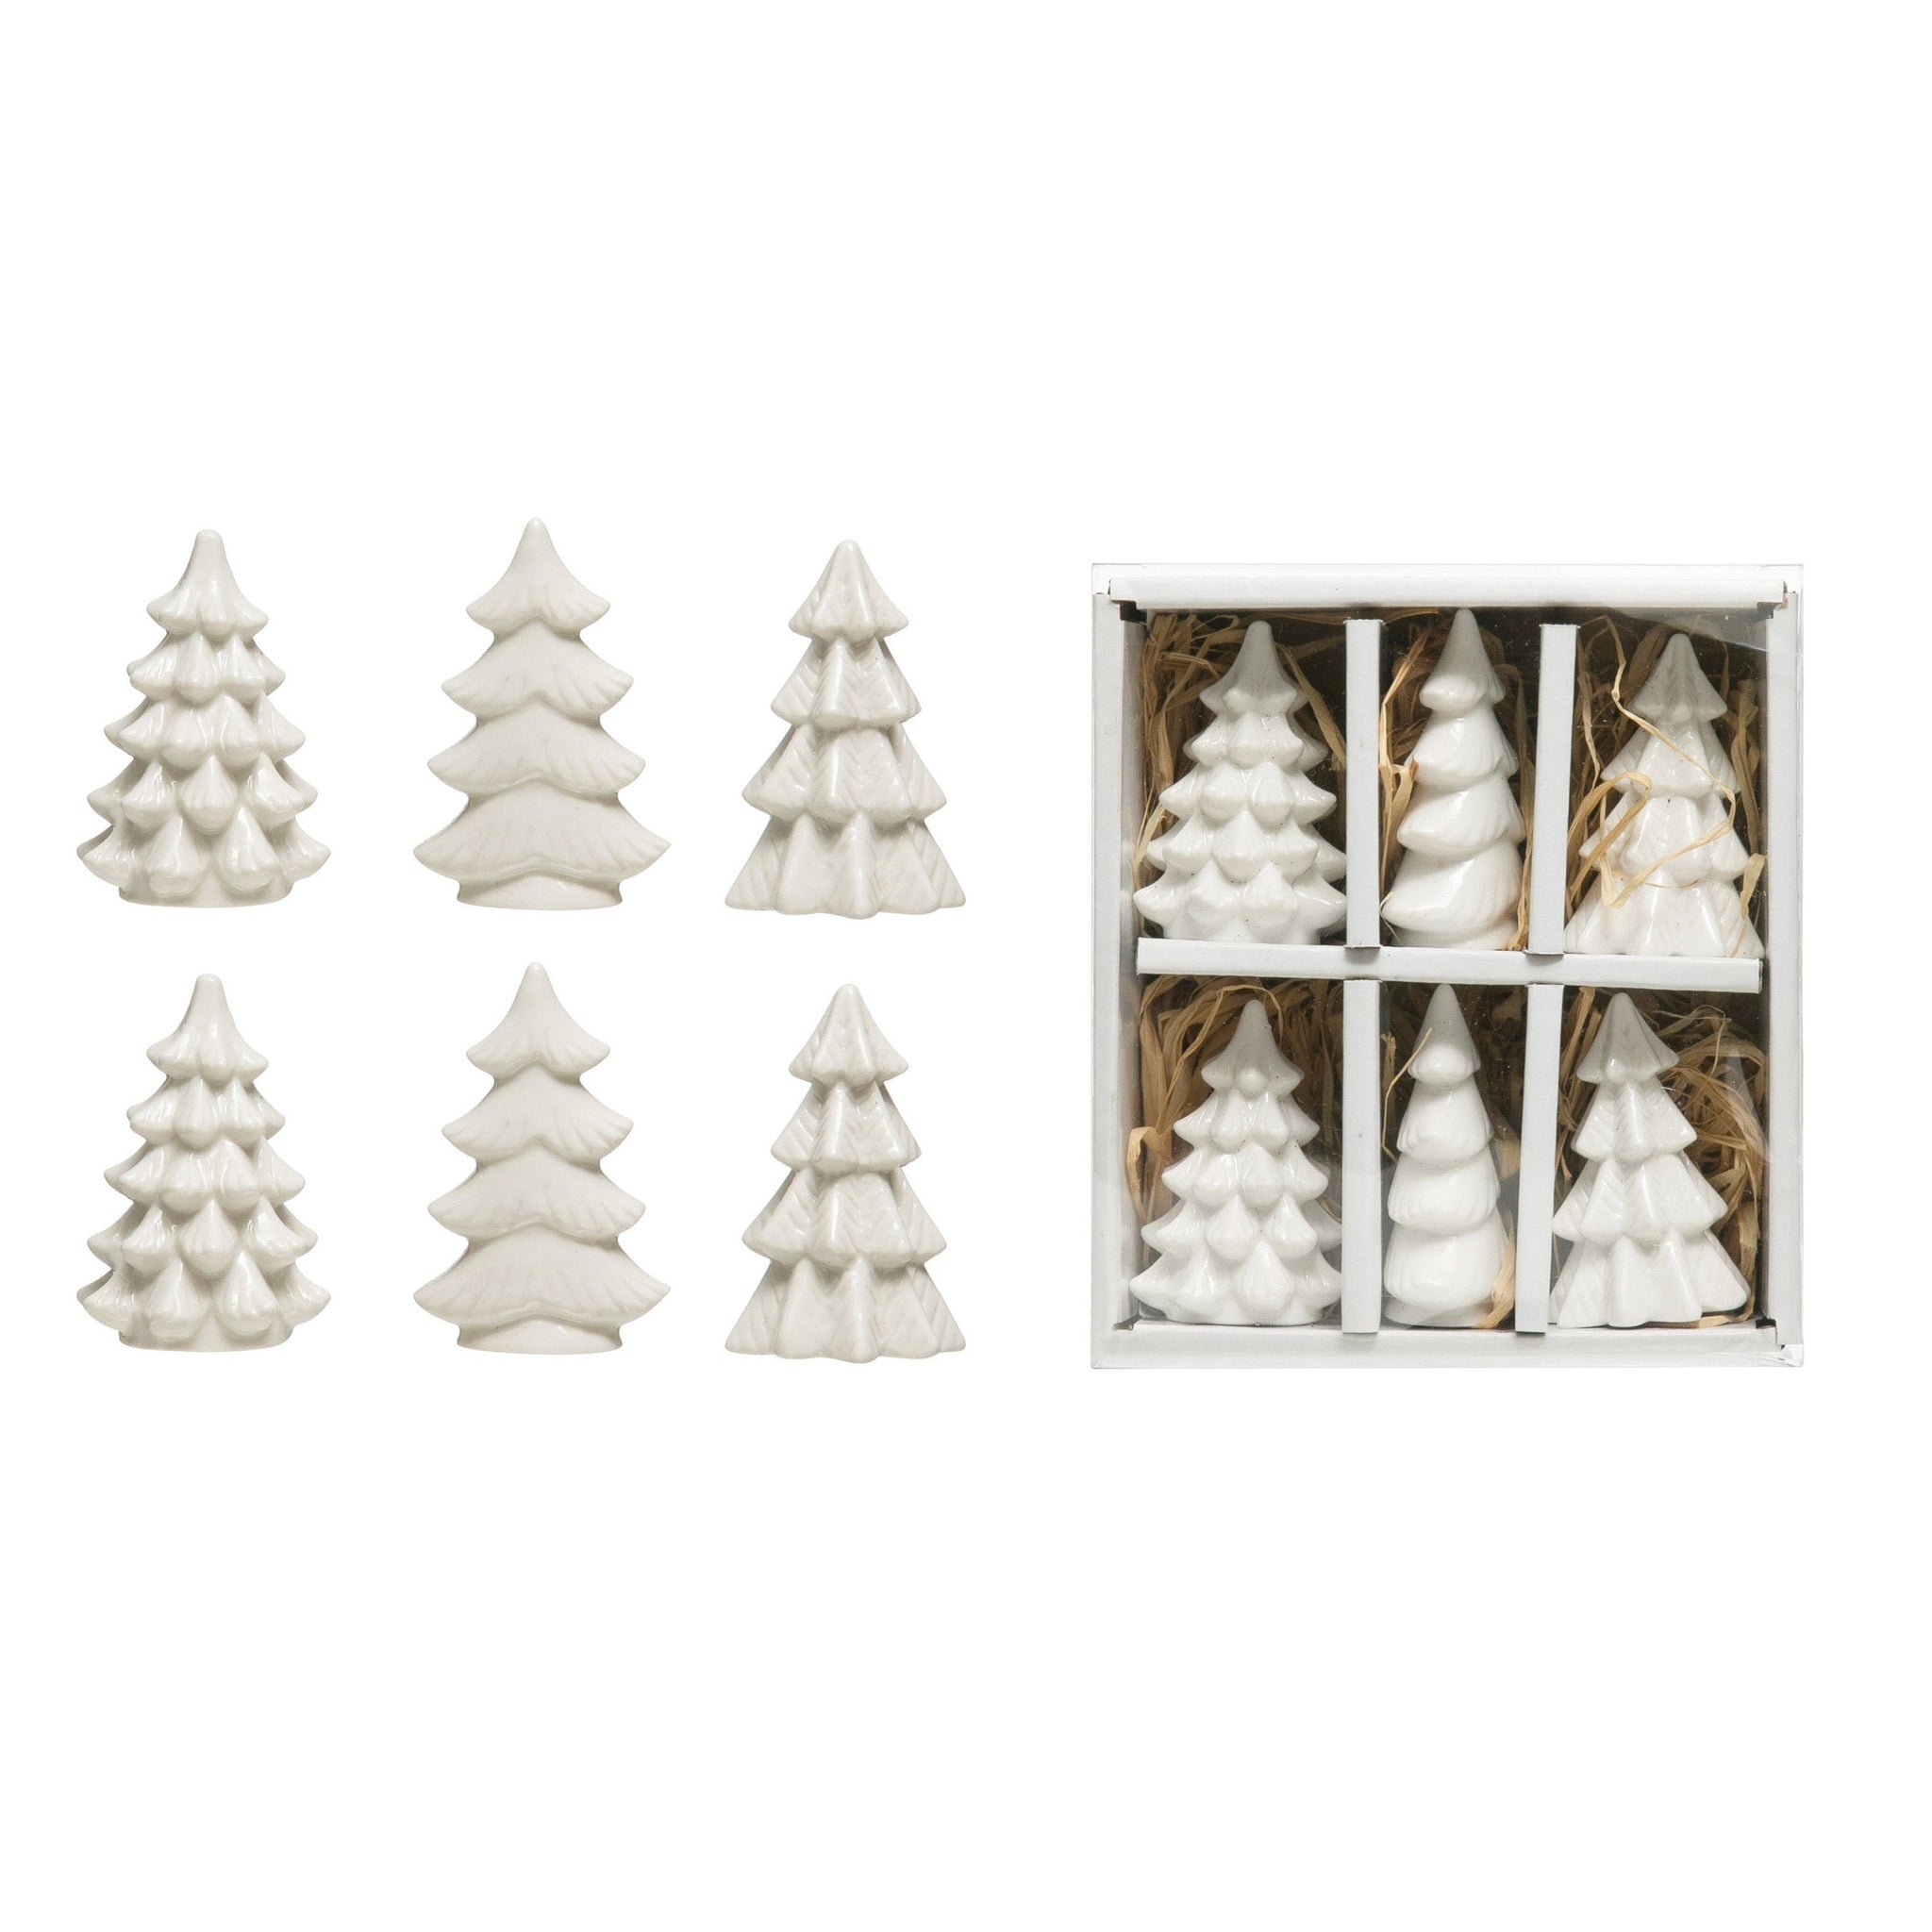 White Stoneware Mini Christmas Trees, Set of 6 in gift box with clear lid